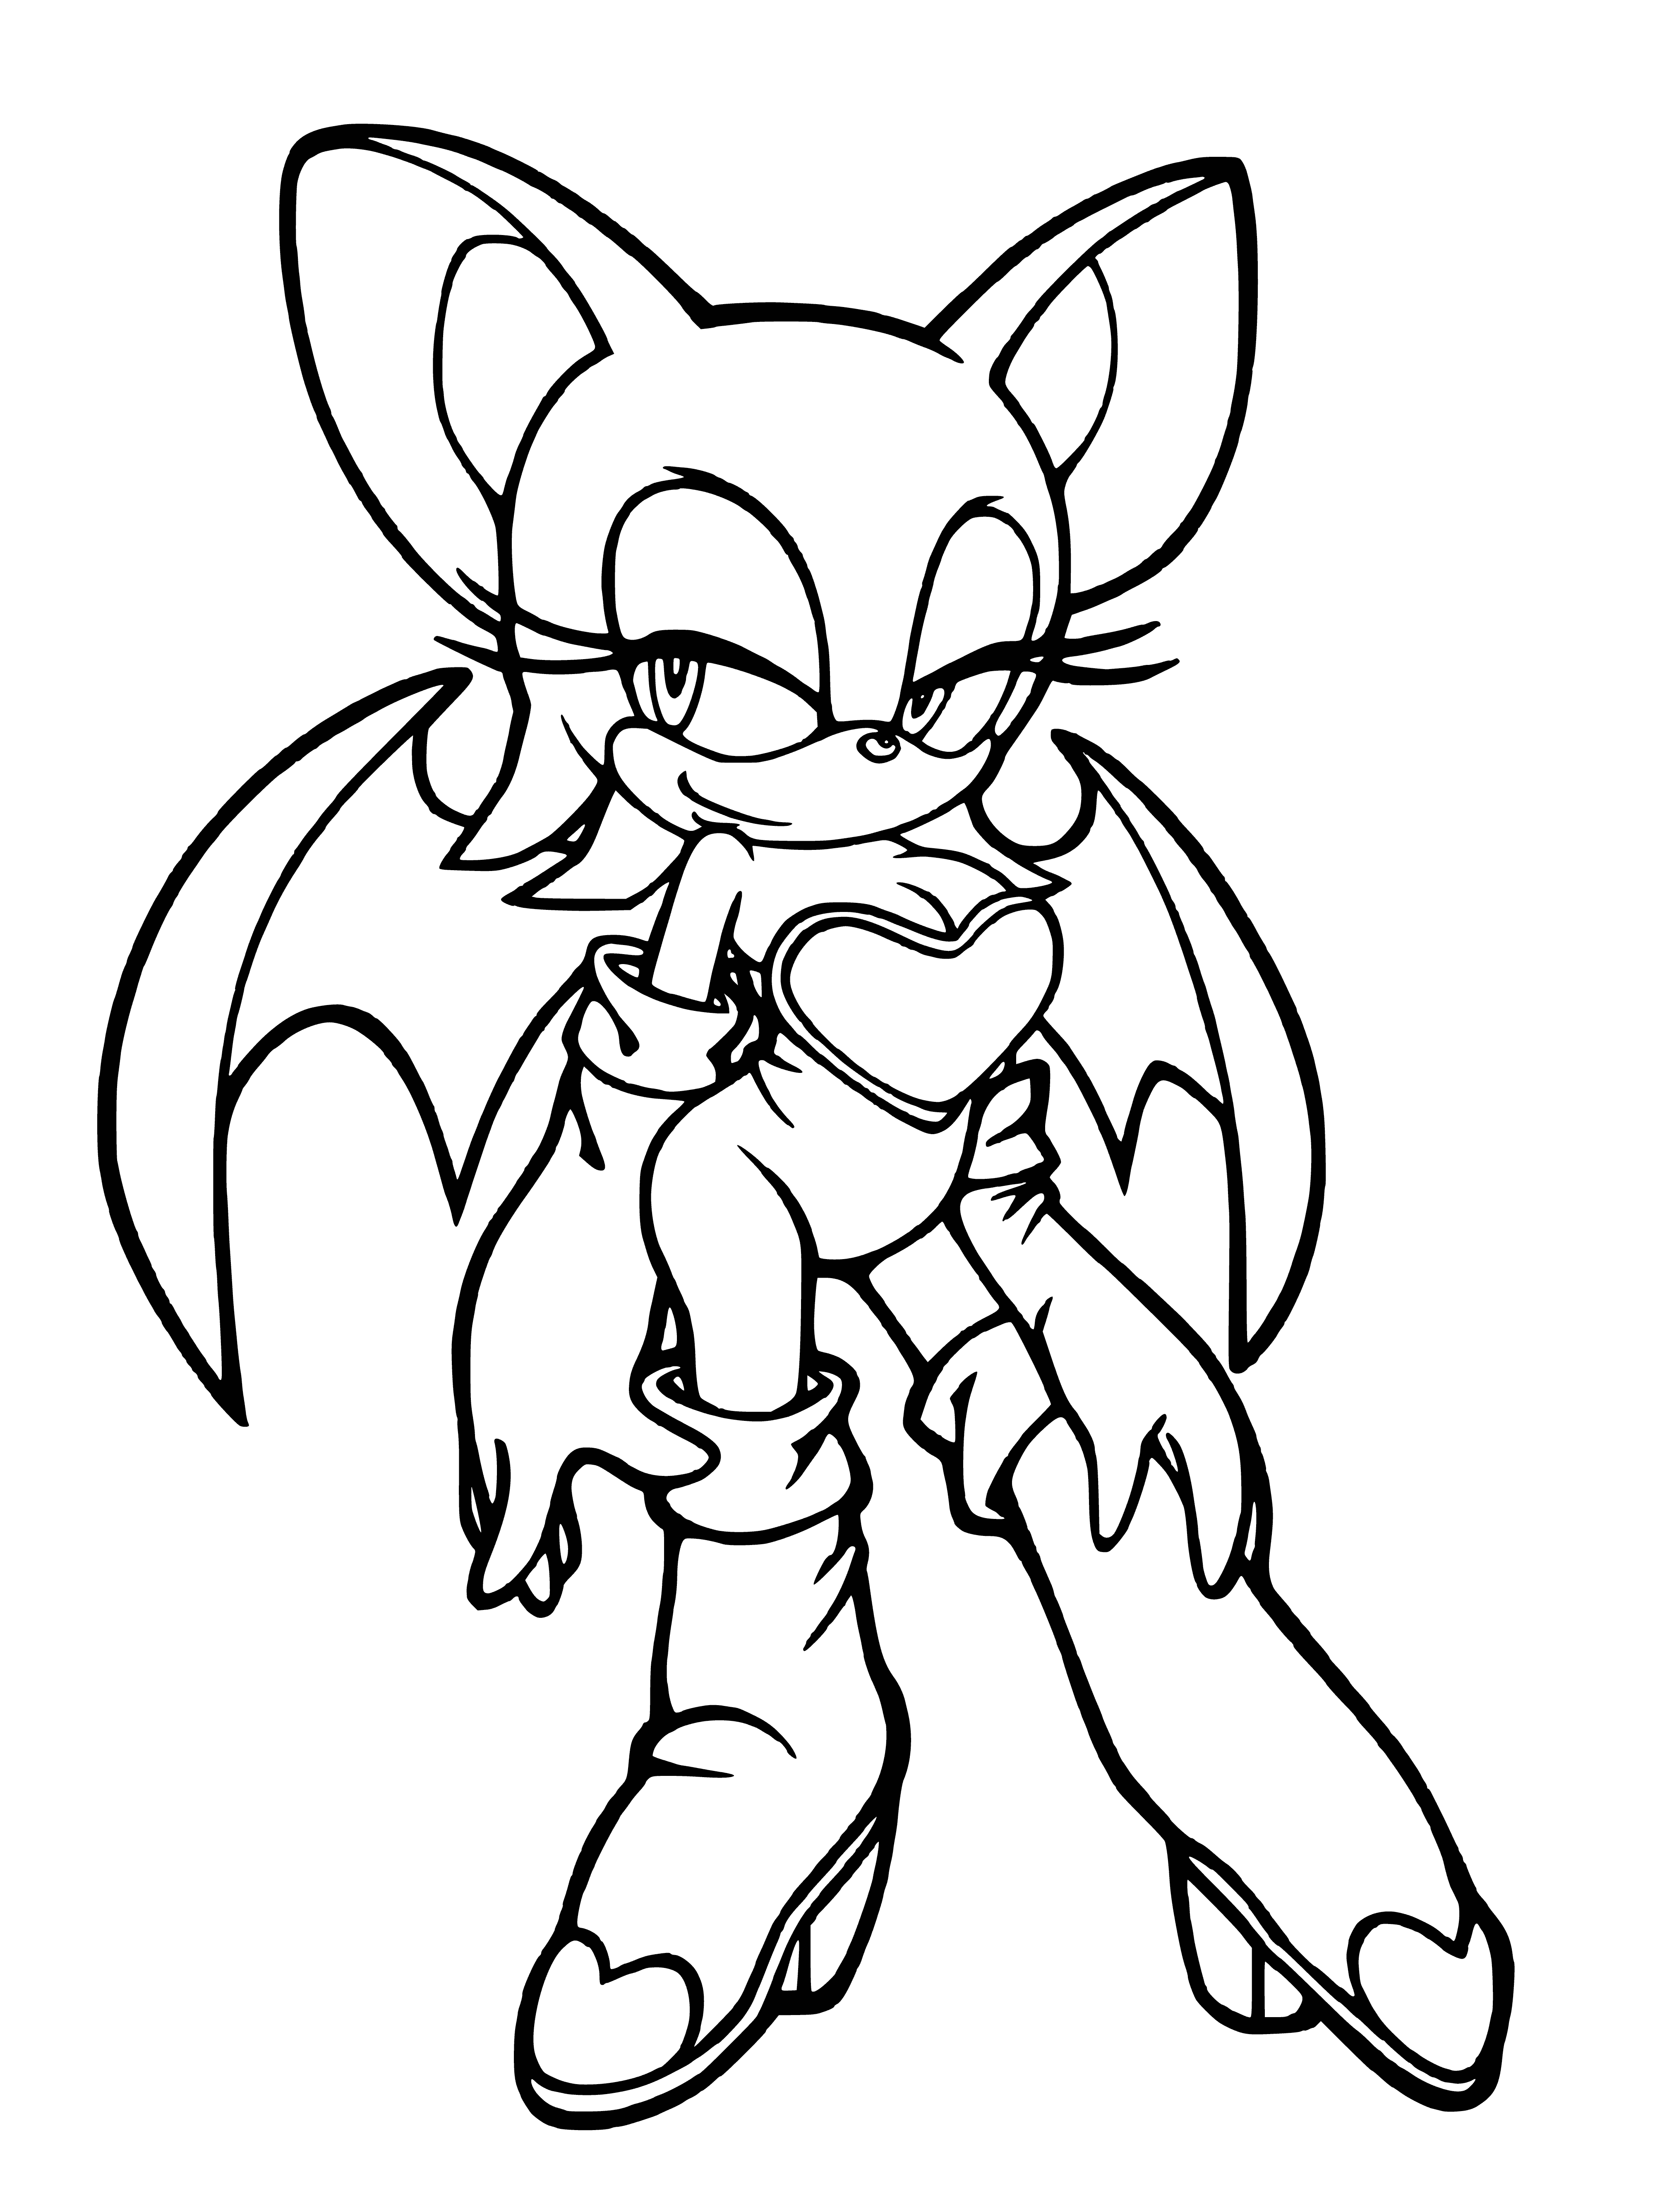 coloring page: Sonic the Hedgehog, the Blue Blur, is the main protagonist of his eponymous franchise. Wielding a shotgun, this anthropomorphic blue hedgehog uses his supersonic speed to fight evil.